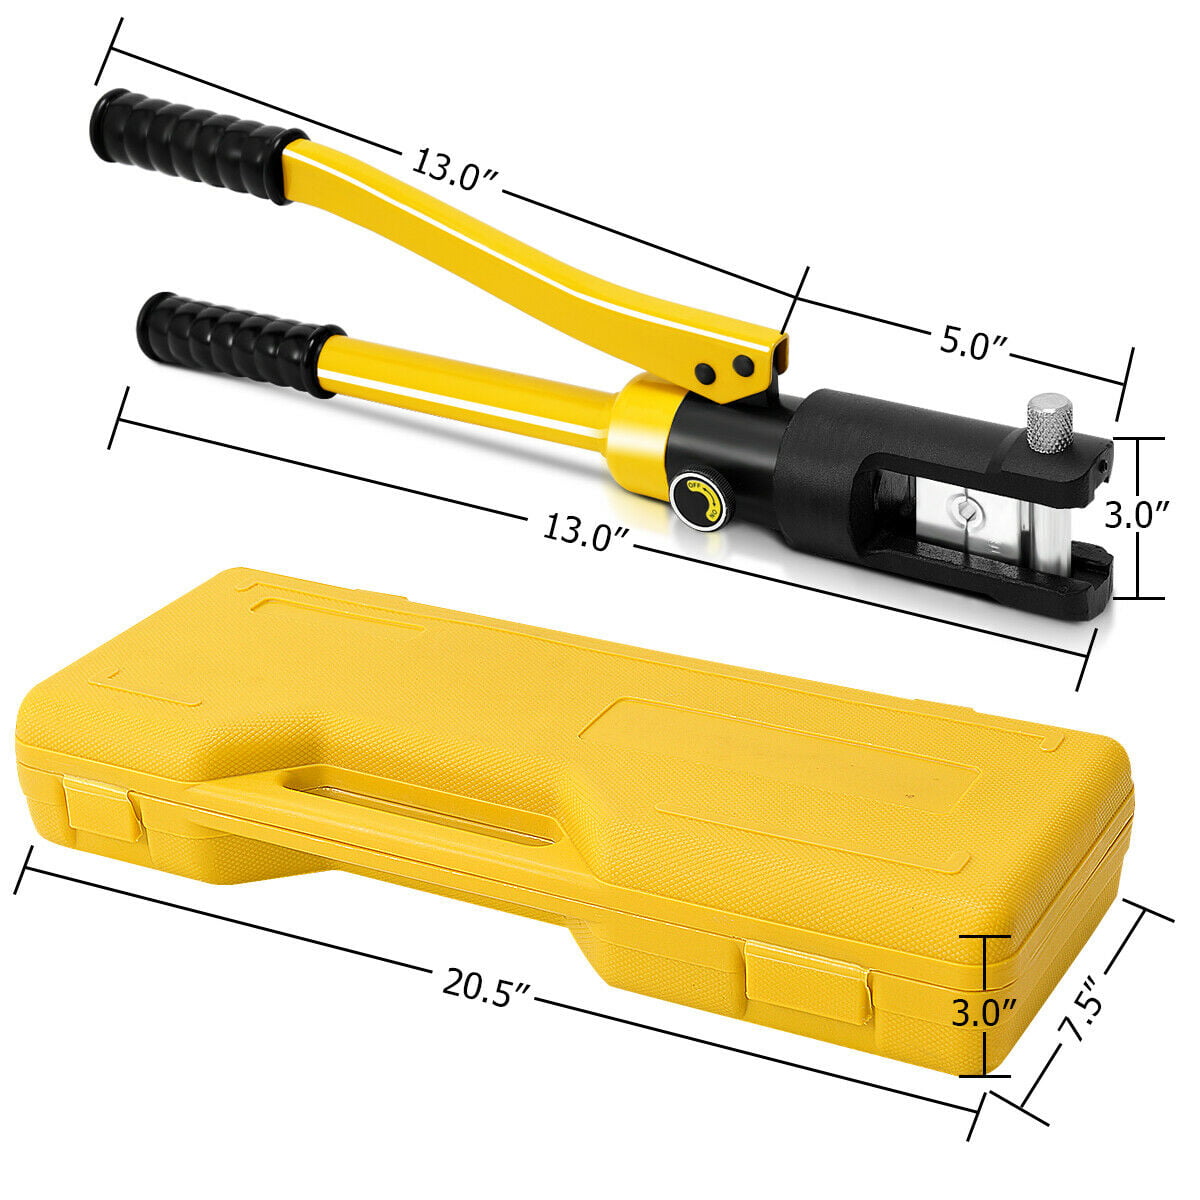 16 Ton Hydraulic Wire Crimper Crimping Tool Battery Cable Lug Terminal 11 Dies 